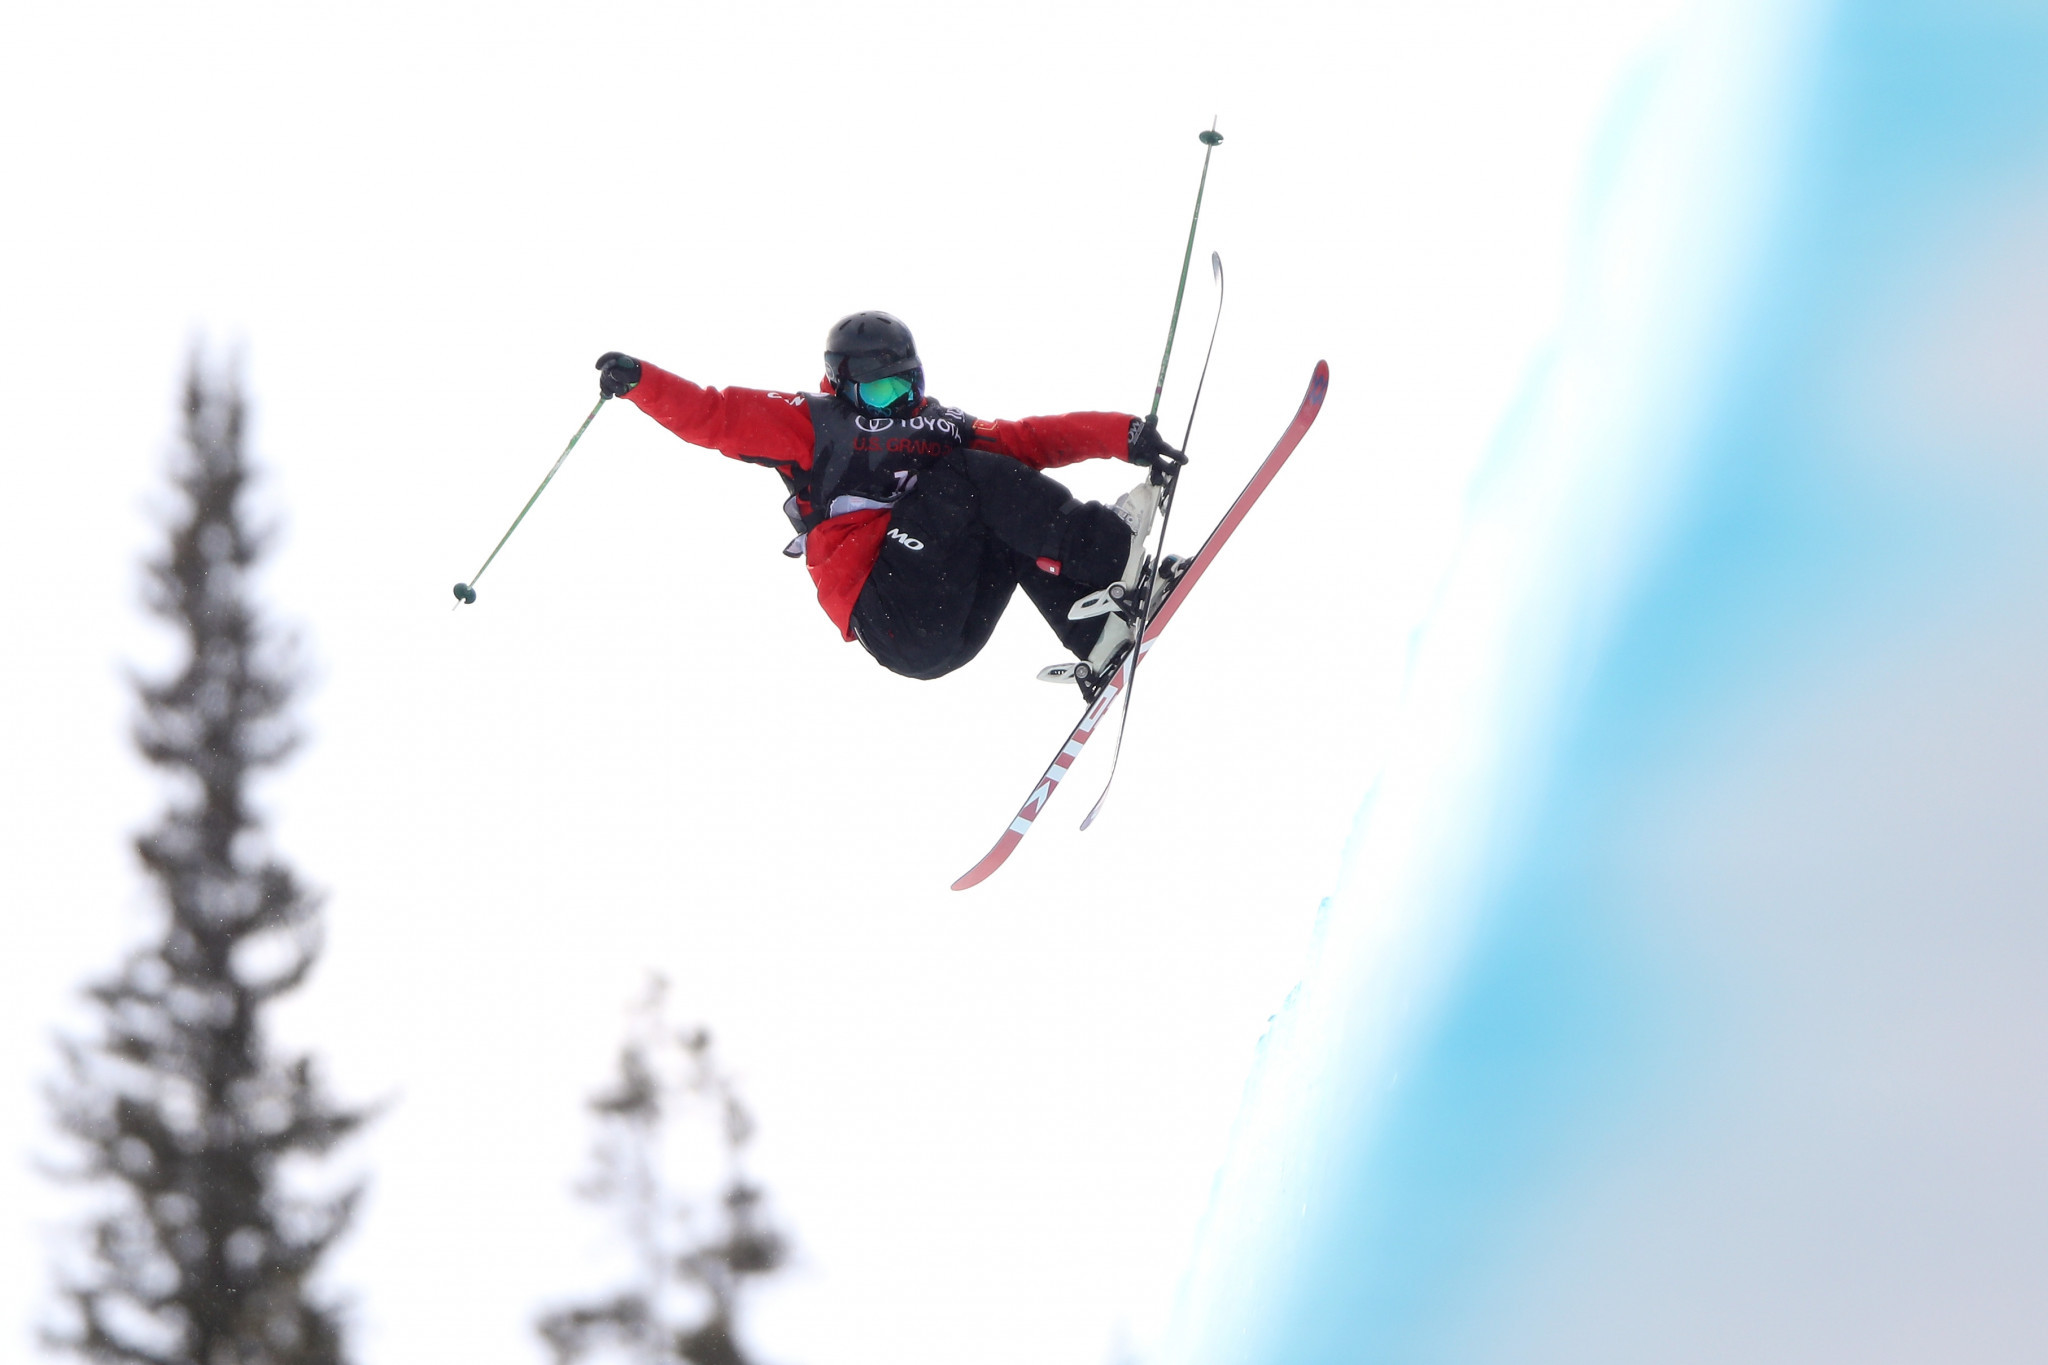 Zhang secures victory at first Halfpipe World Cup event to be held in China